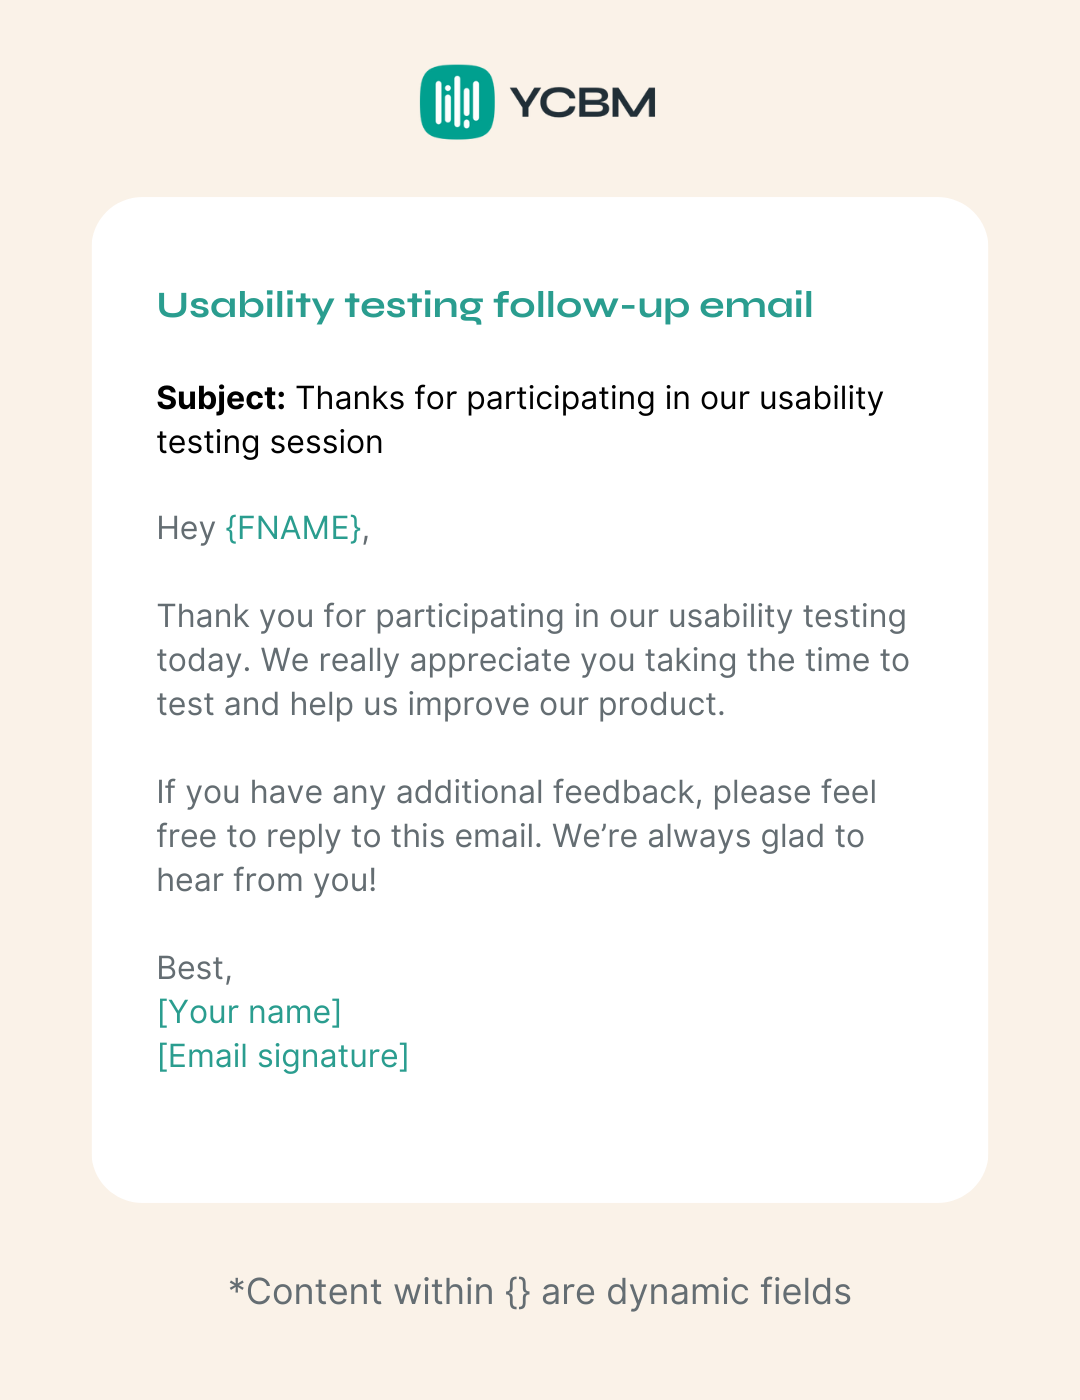 Usability testing follow-up email template